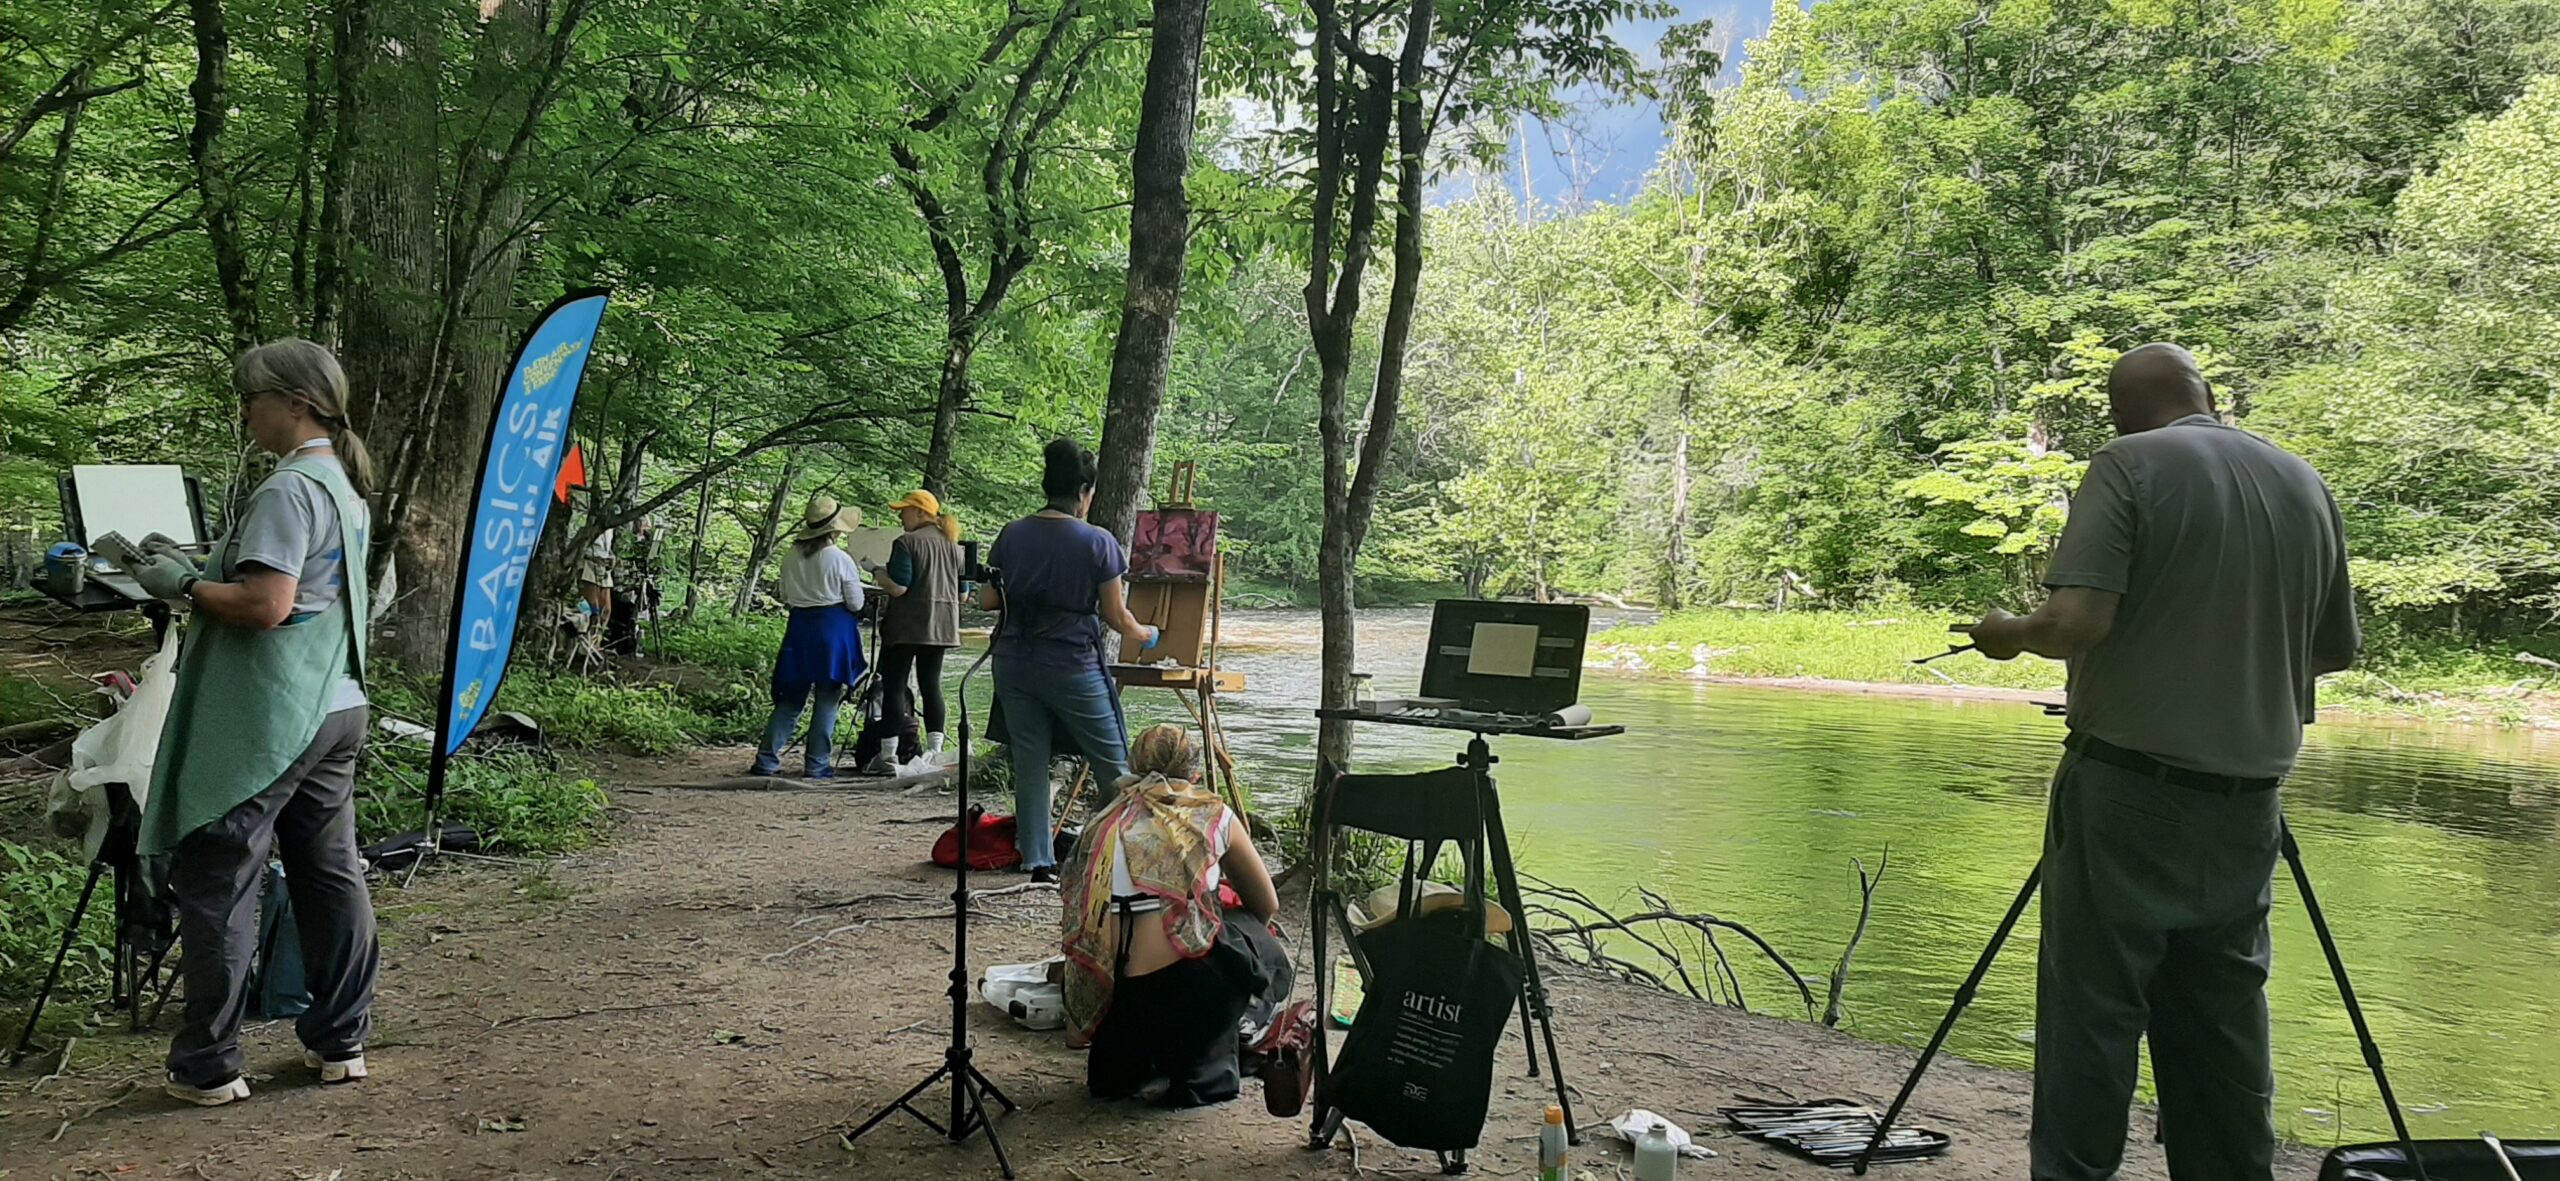 Many painters found a cozy place to set up along the bank to paint, including our "Plein Air Basics" group